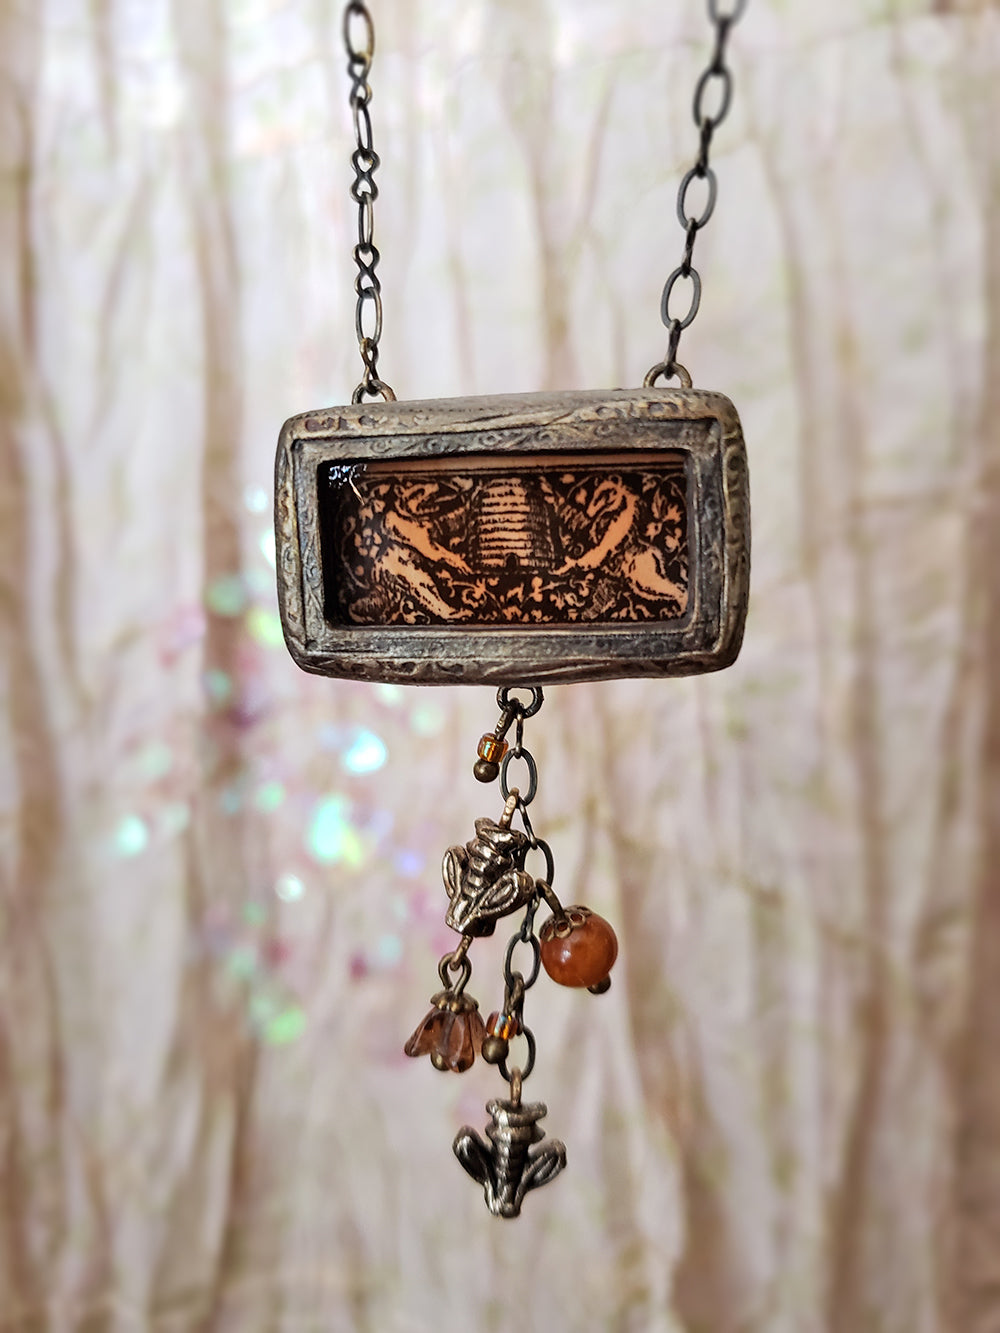 Bears & Hive & Bees ~ Pictorial Shrine Amulet